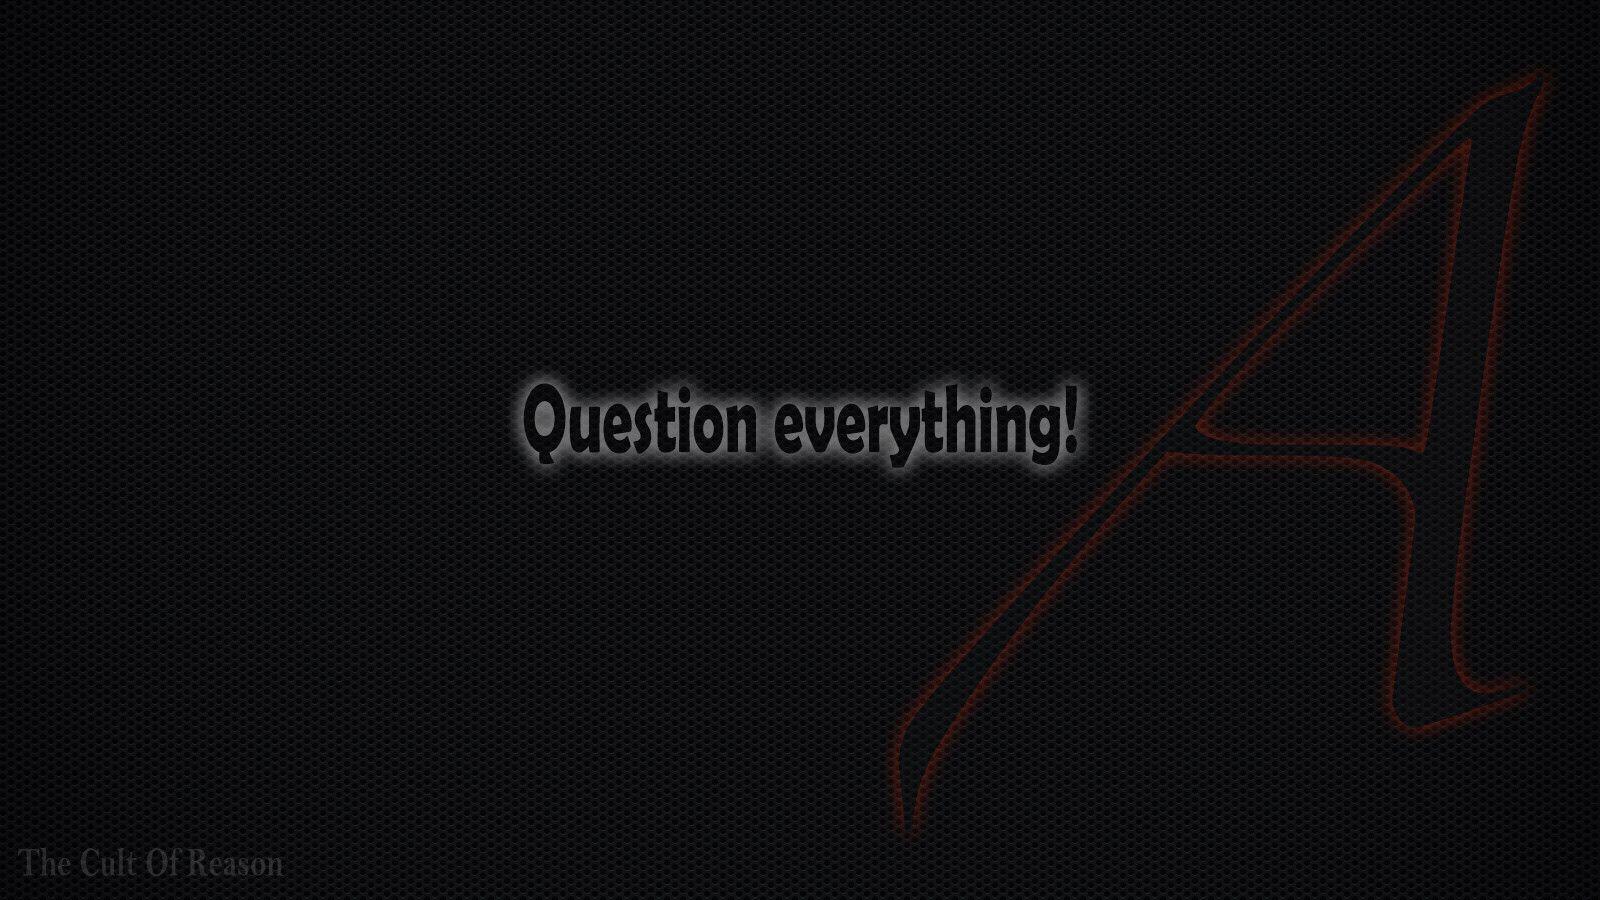 Wallpapers Free Atheism Question Everything 1600x900PX ~ Atheist